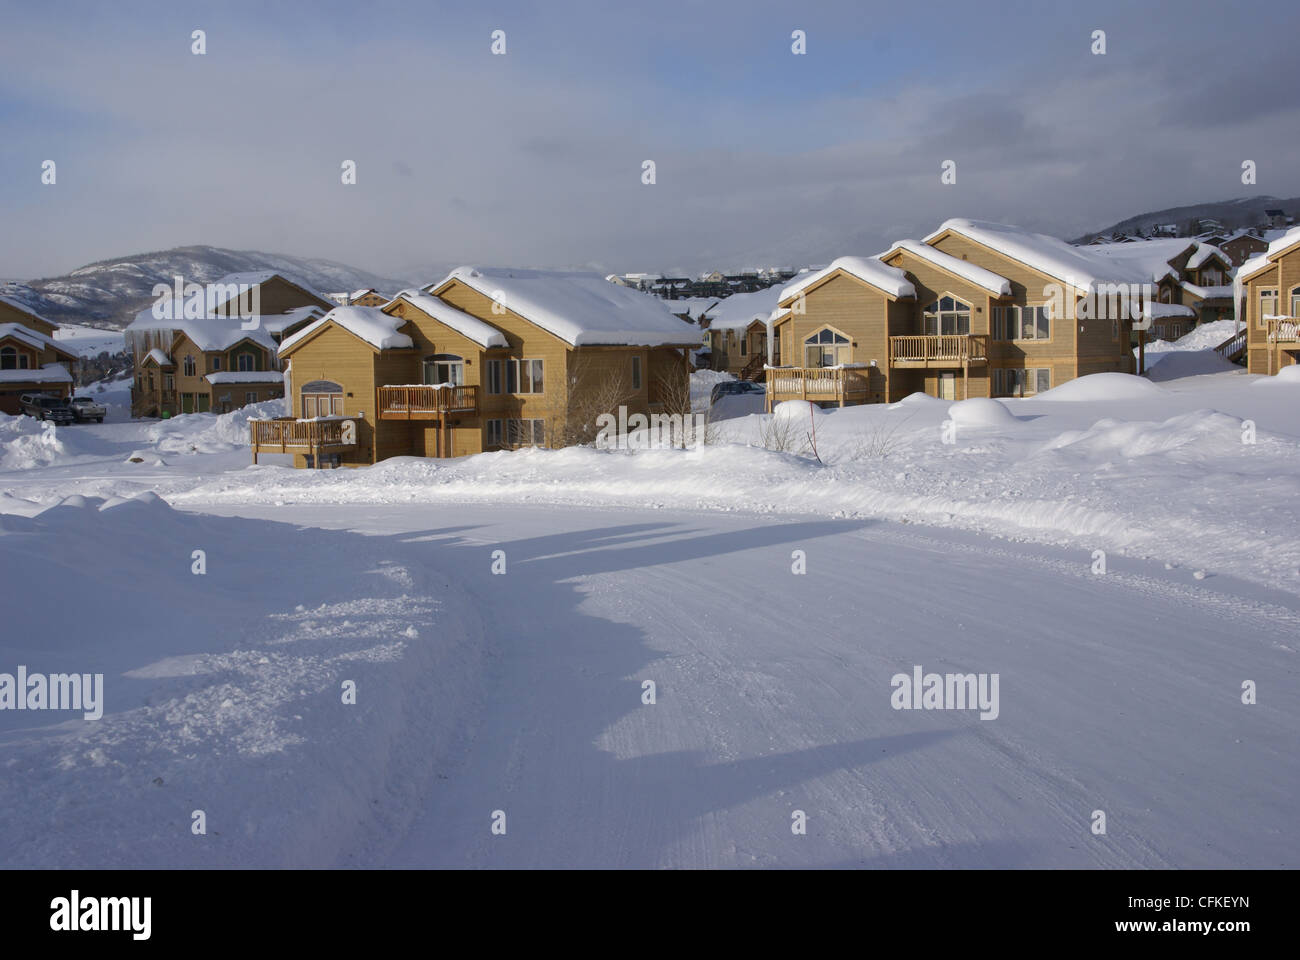 modern homes houses townhouses buildings condos winter rockies colorado brown snow white blue ice icicle weather roof housing de Stock Photo